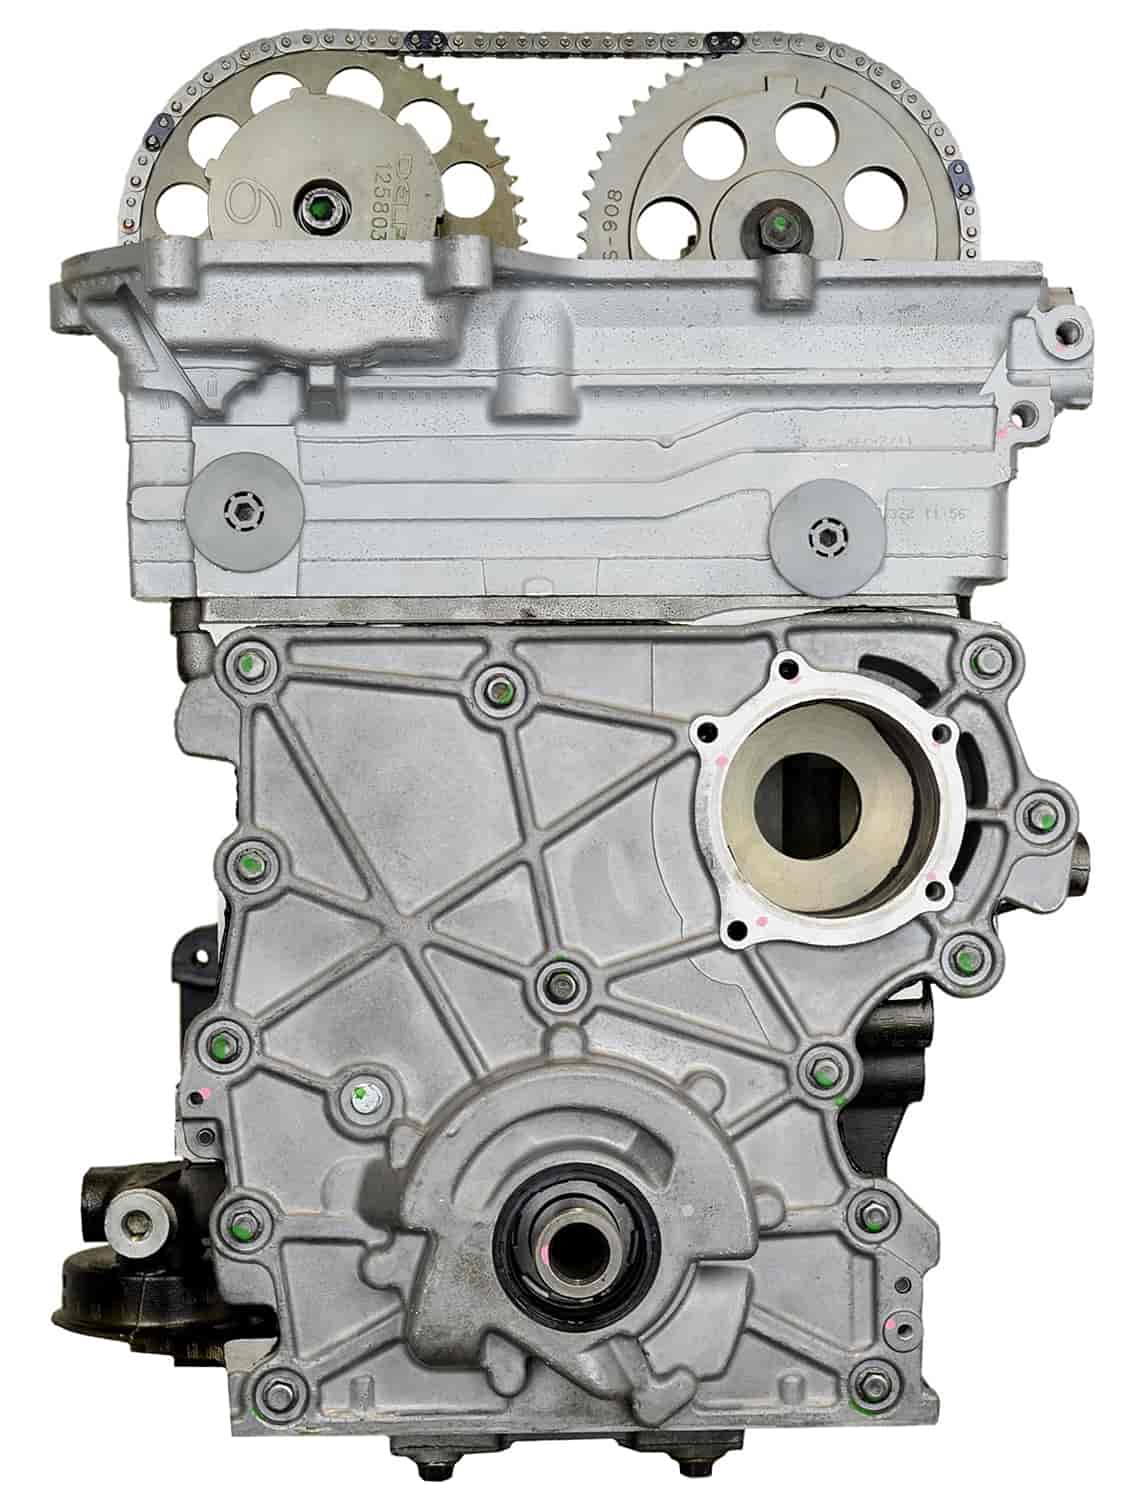 Remanufactured Crate Engine for 2006-2007 Chevy/Buick/GMC/Saab SUV with 4.2L L6